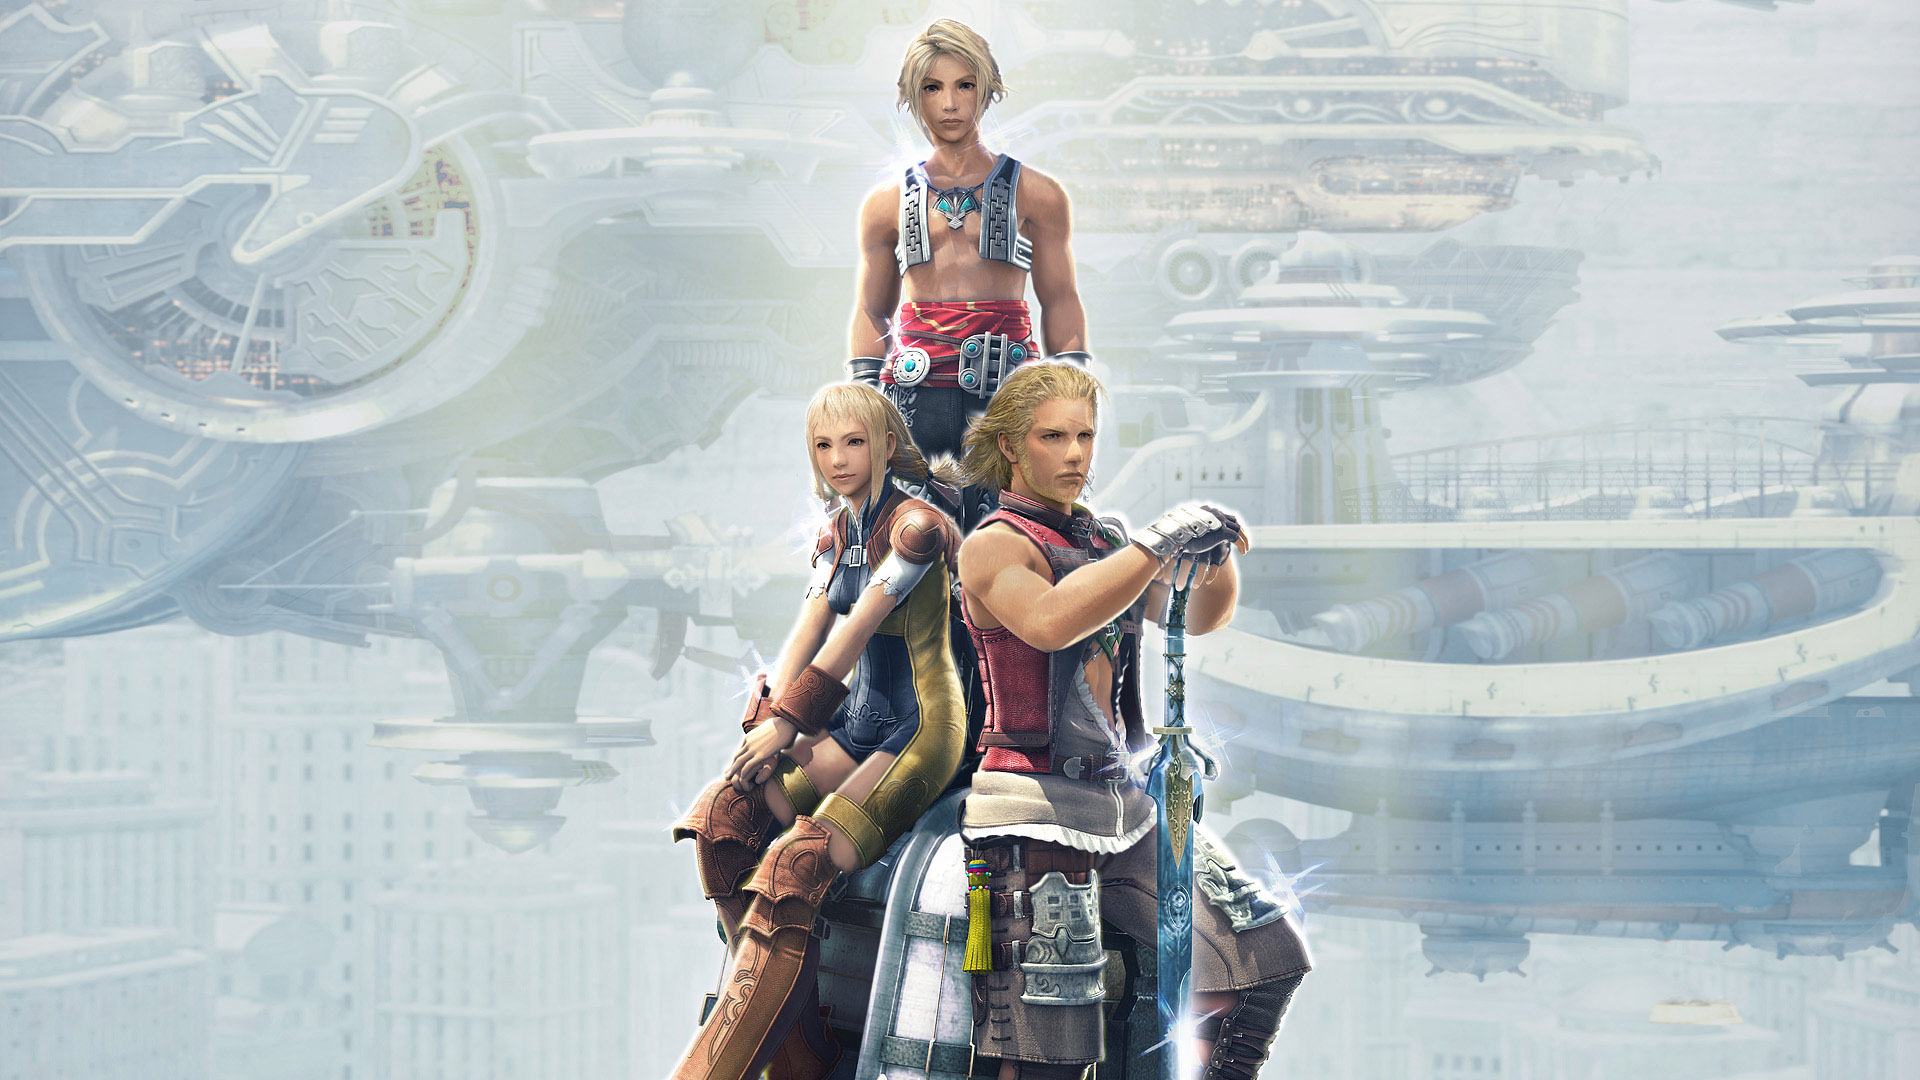 Video Game Final Fantasy Xii 1920x1080